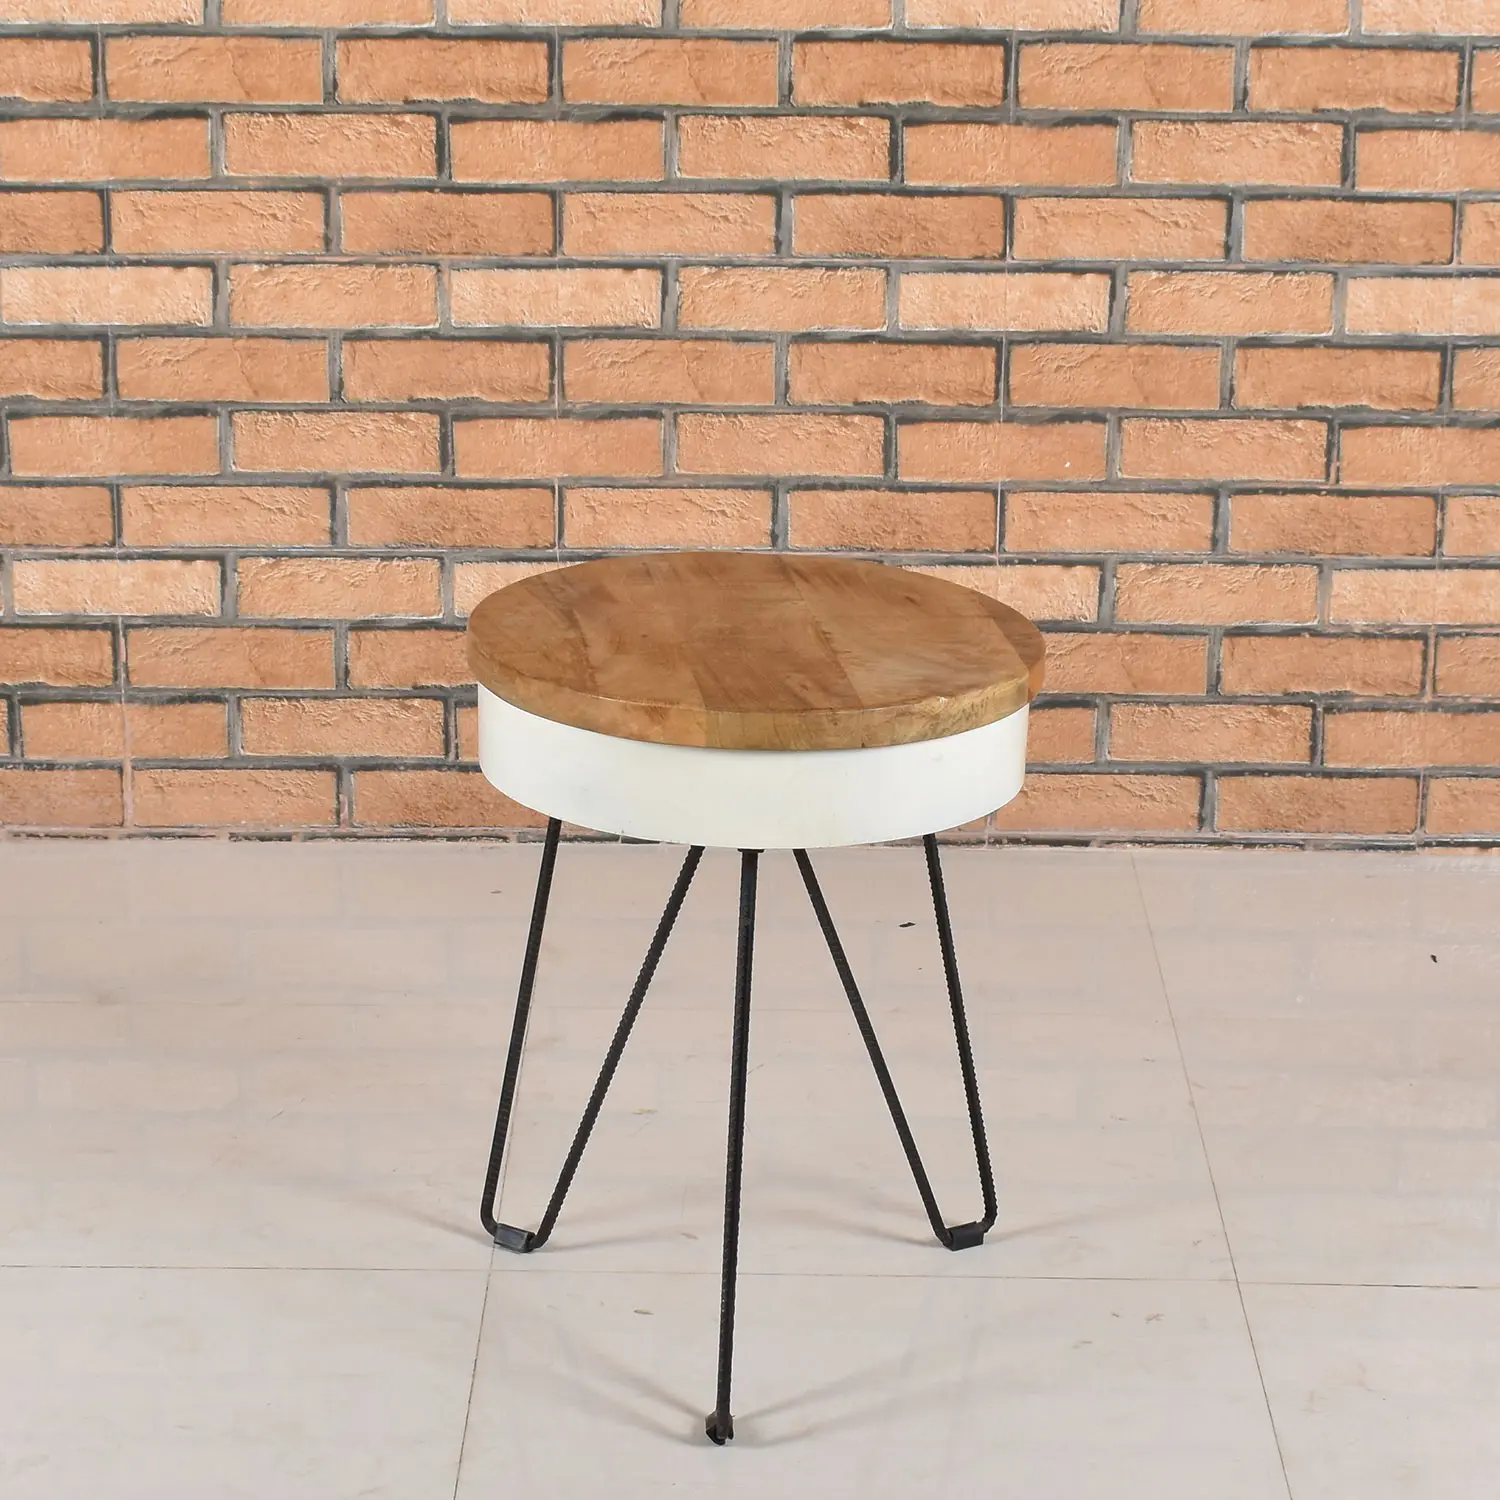 Iron Hairpin Leg Side Table with Wooden Top (Knock Down) - popular handicrafts